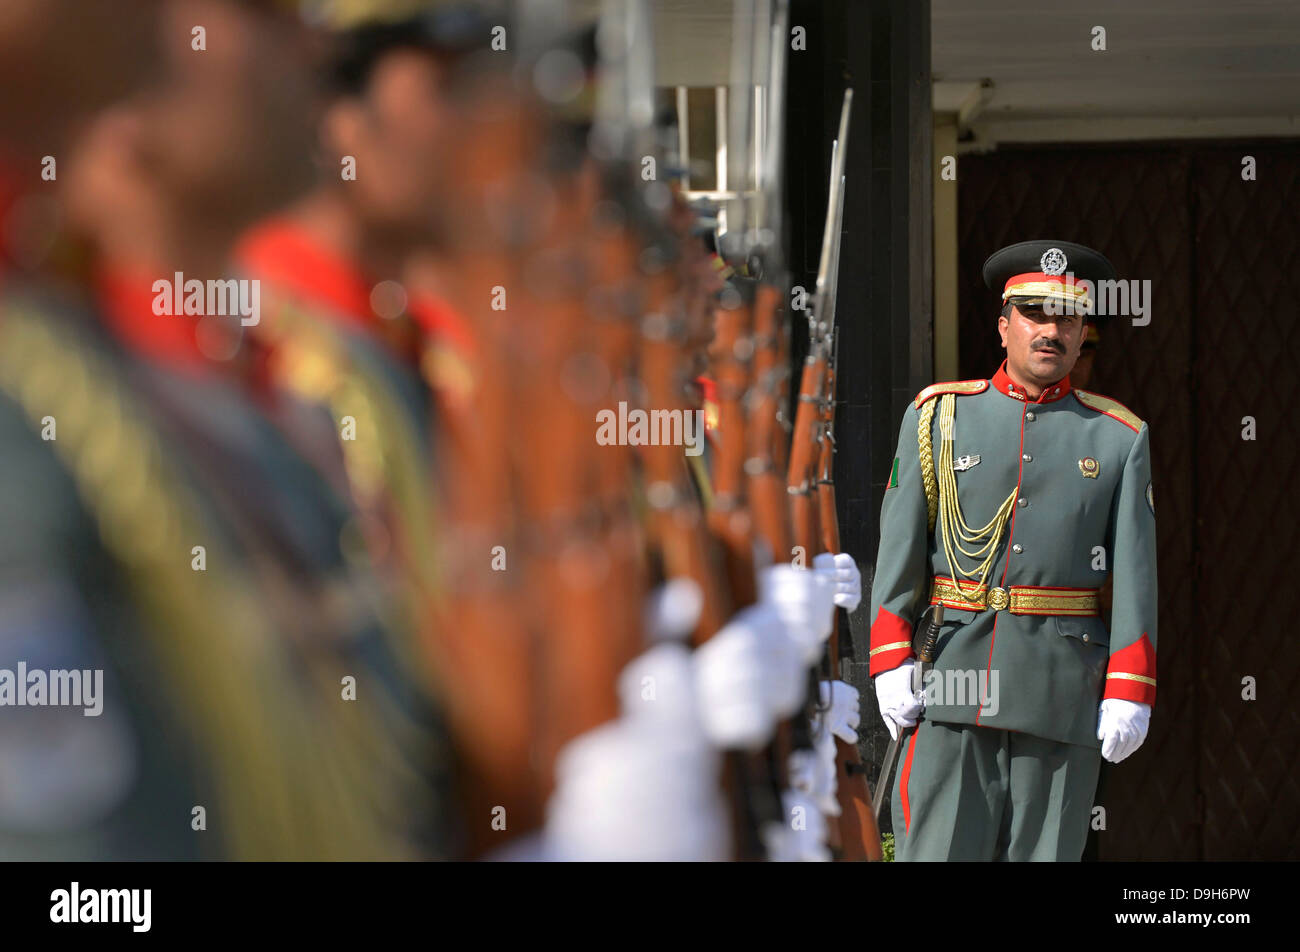 An Afghan officer checks the order of his honor guard as he prepares for the arrival of Deputy Secretary of Defense Ashton Carter at the Ministry of Interior May 12, 2013 in Kabul, Afghanistan. Stock Photo